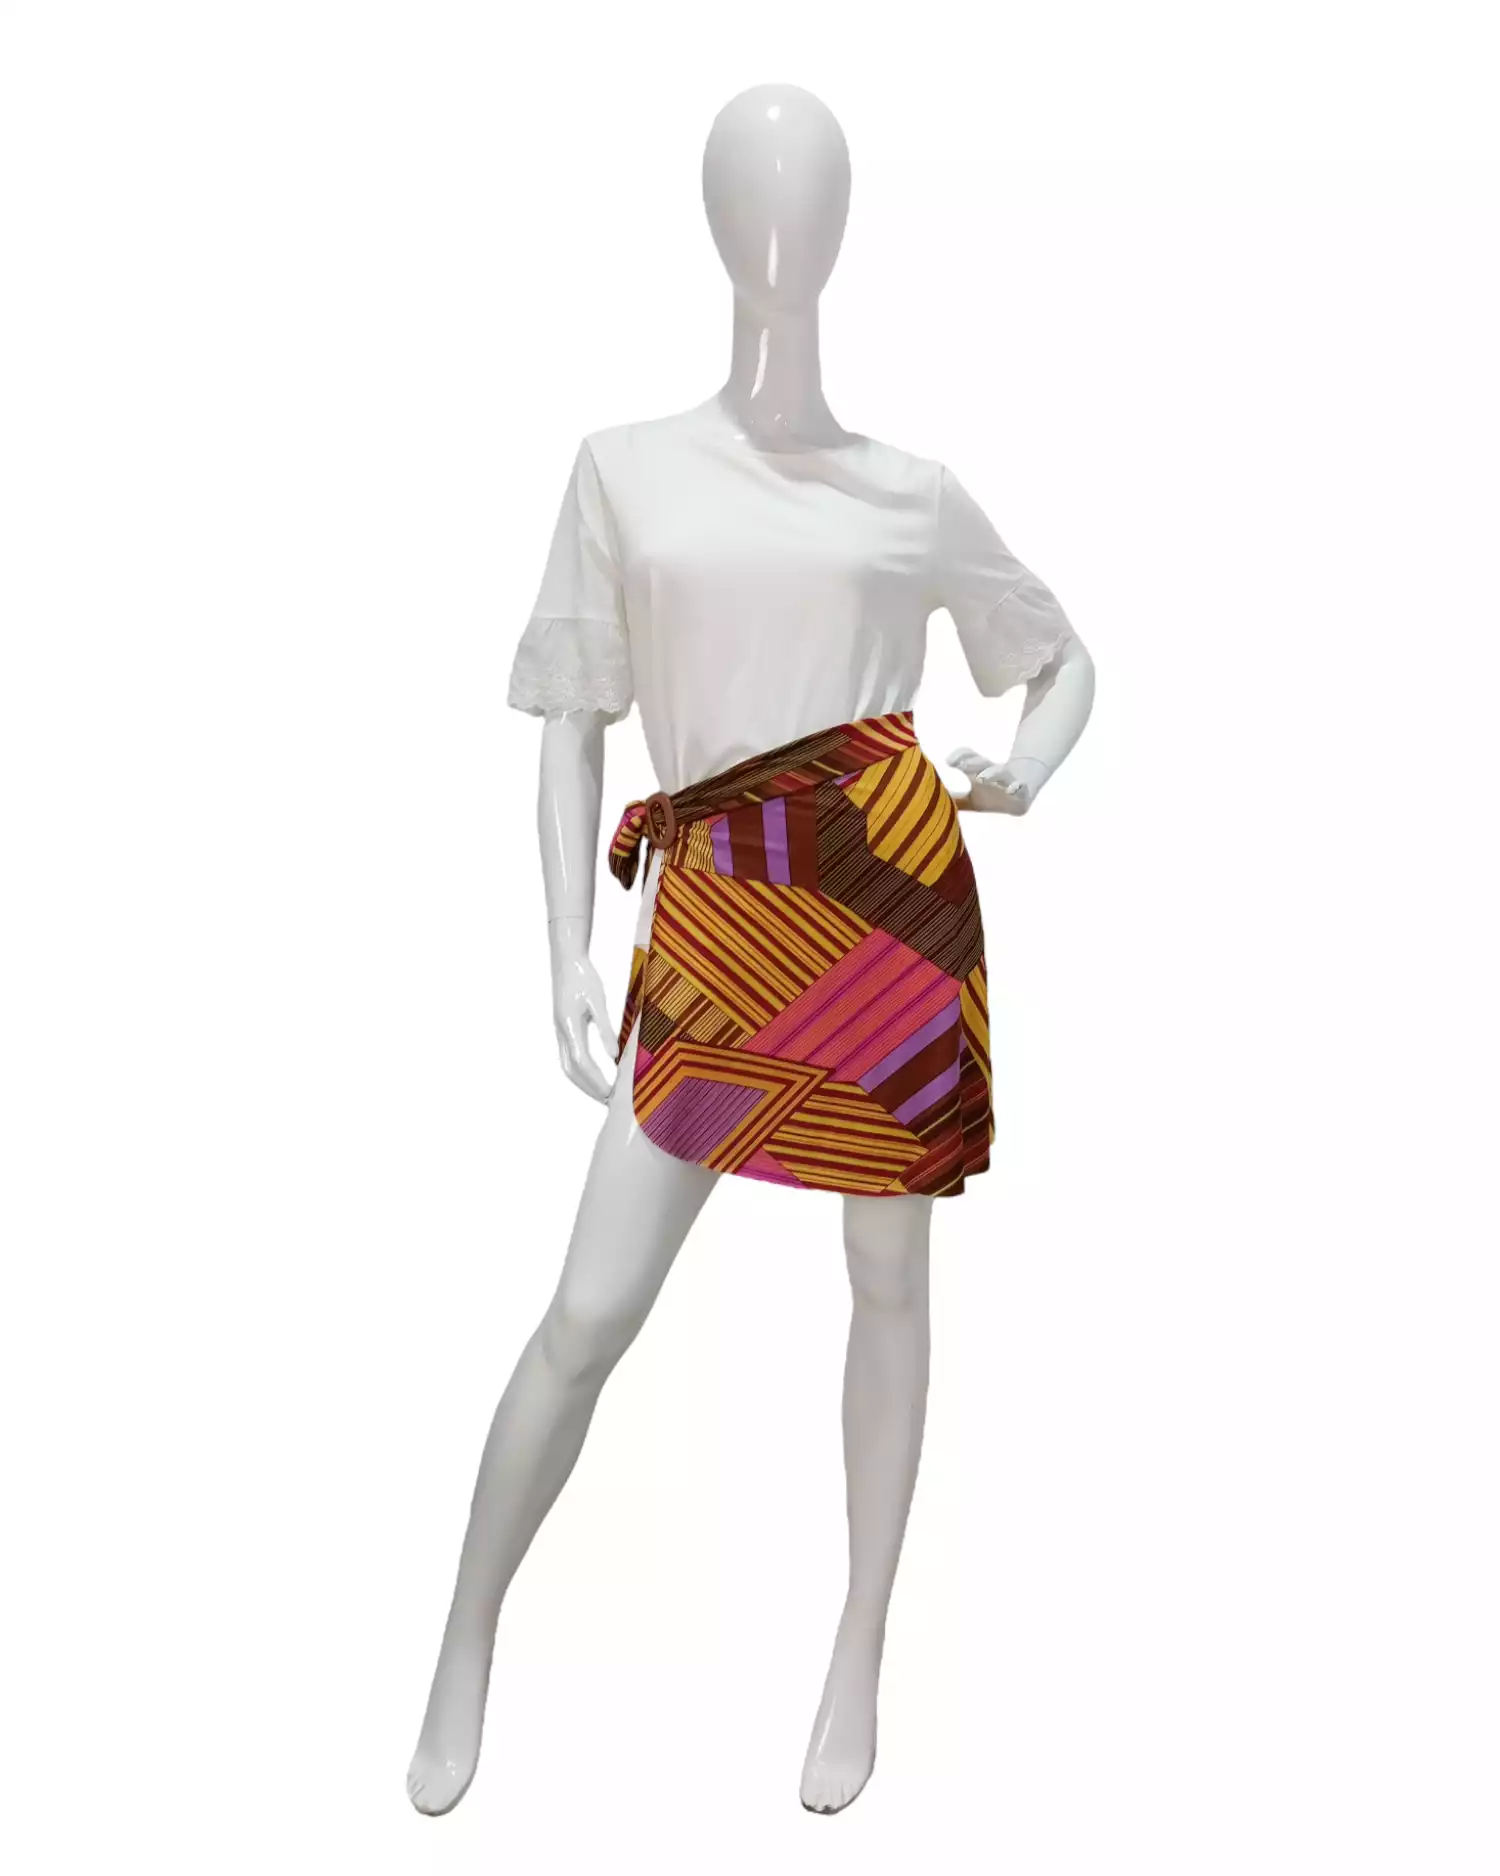 Skirt by Nicole Olivier